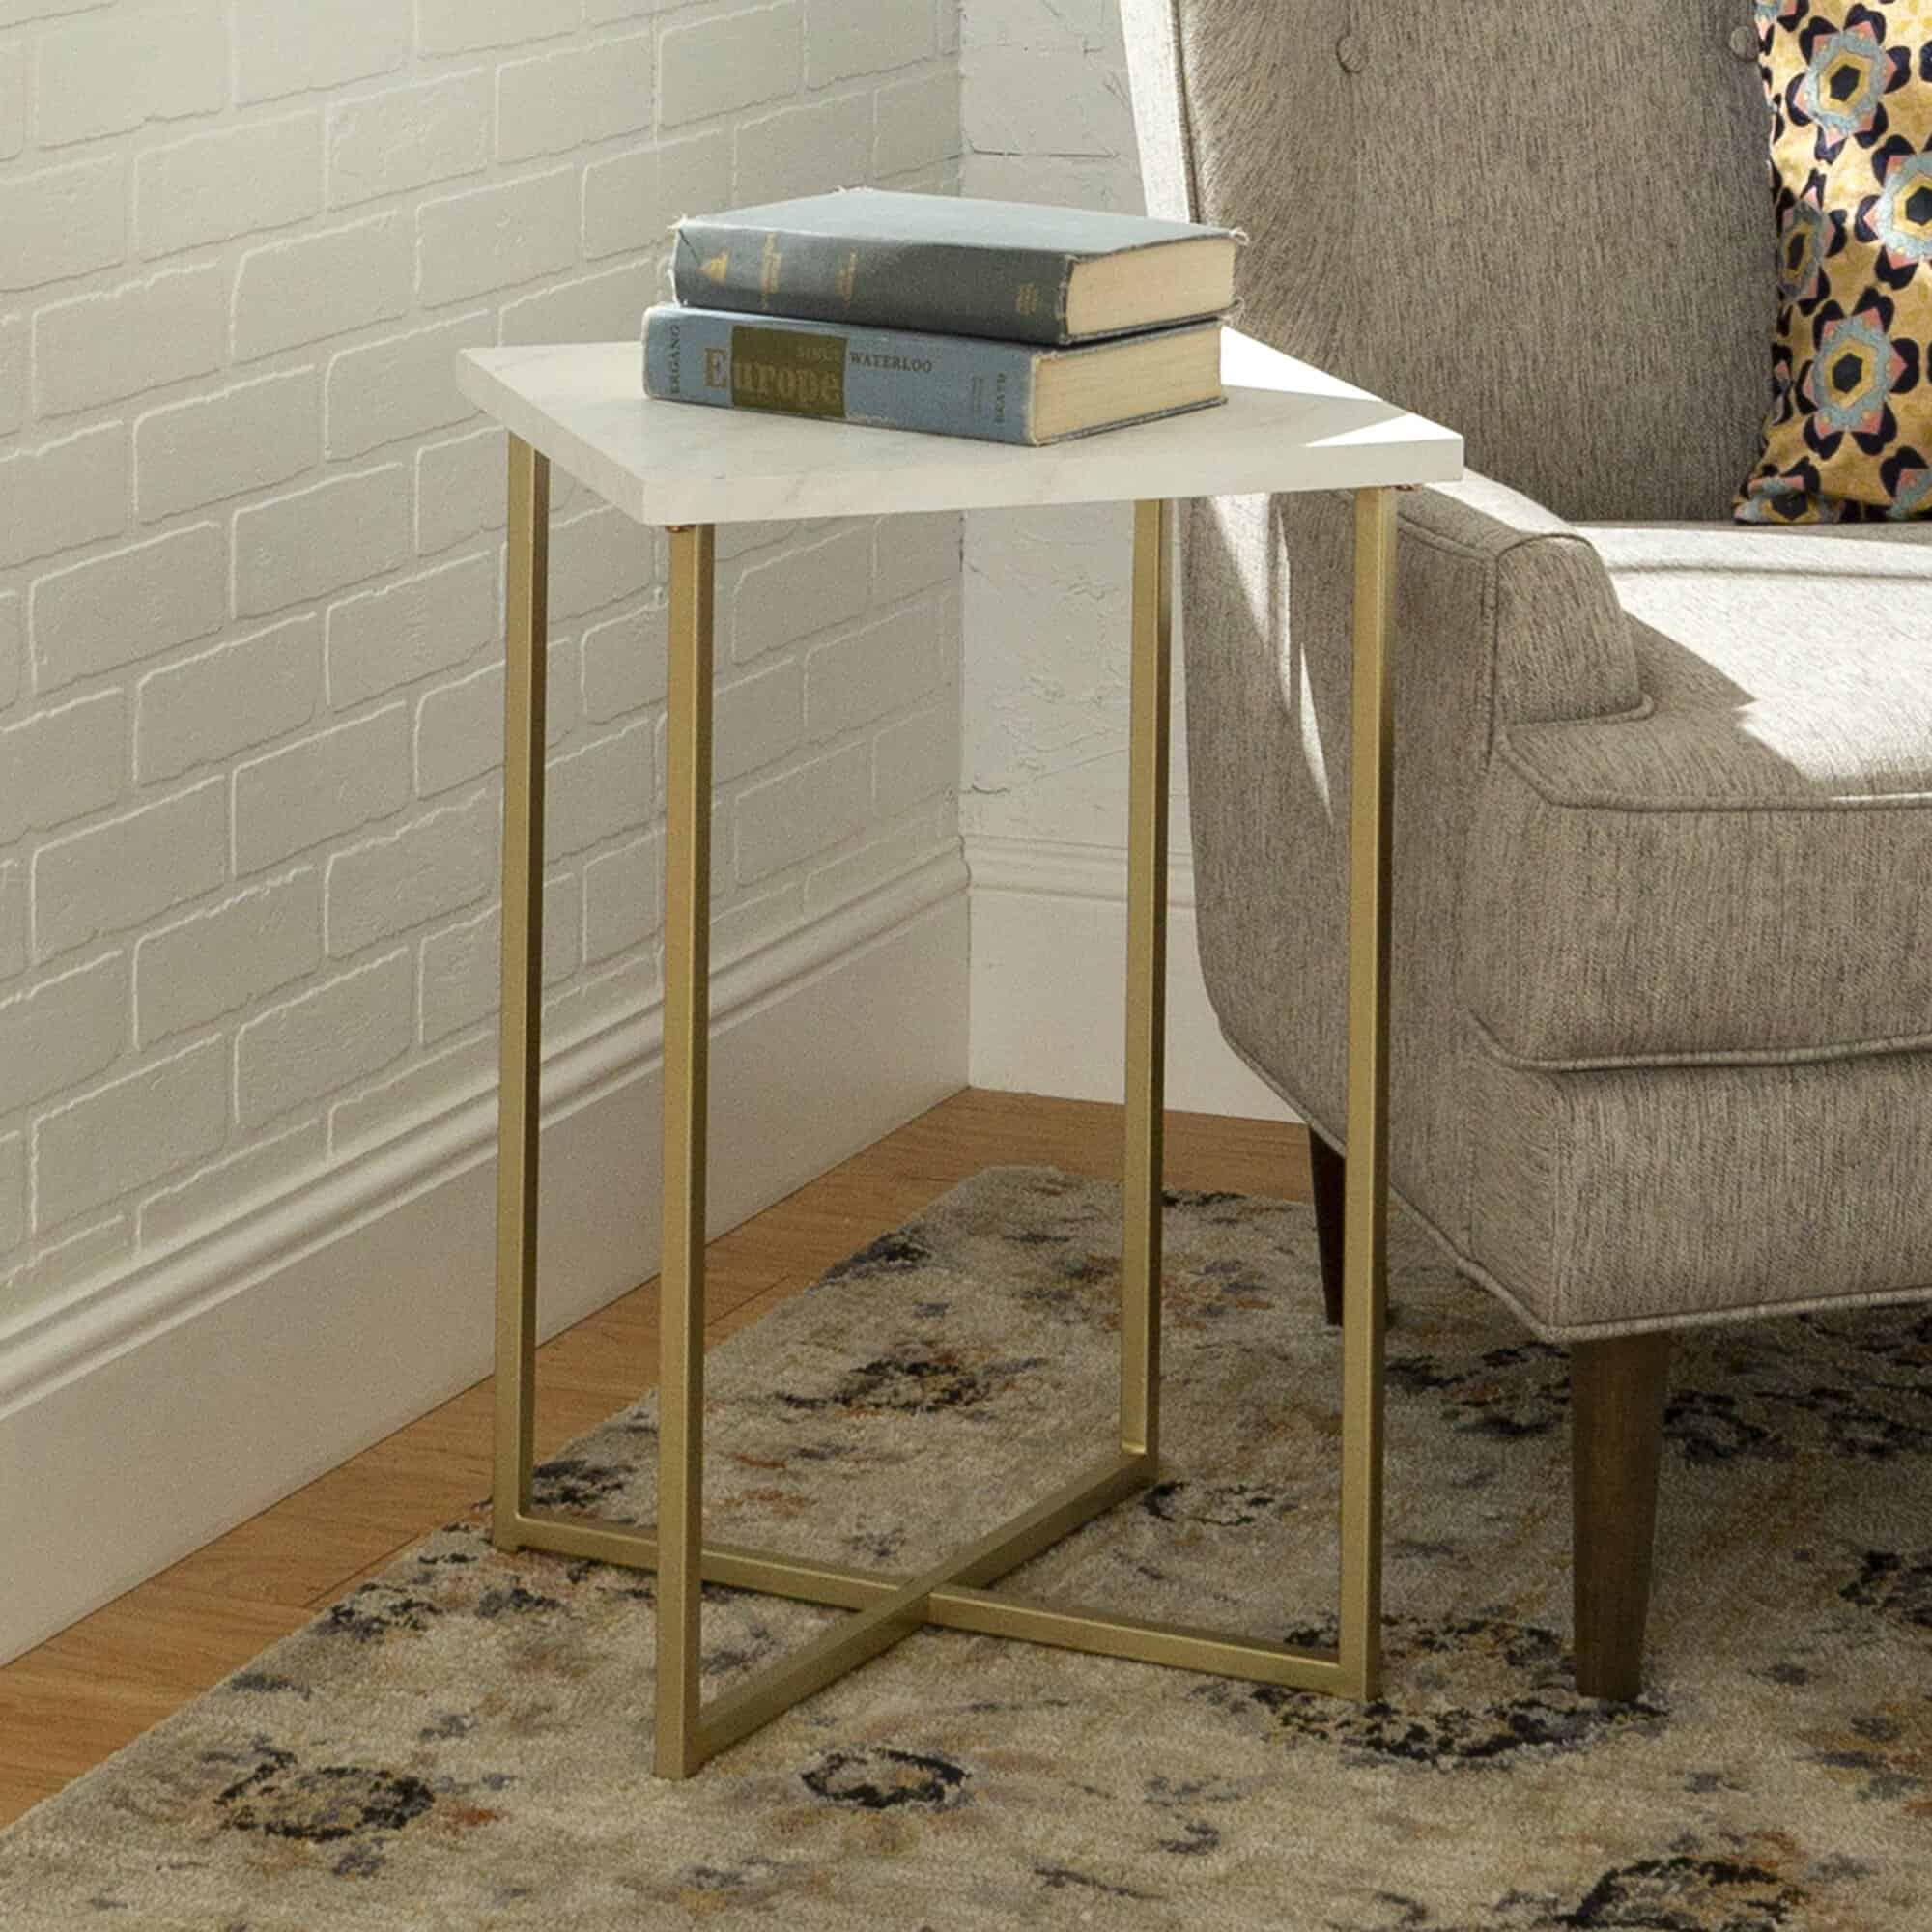 This White And Gold End Table Adds A Stylish But Minimal Touch To A Home